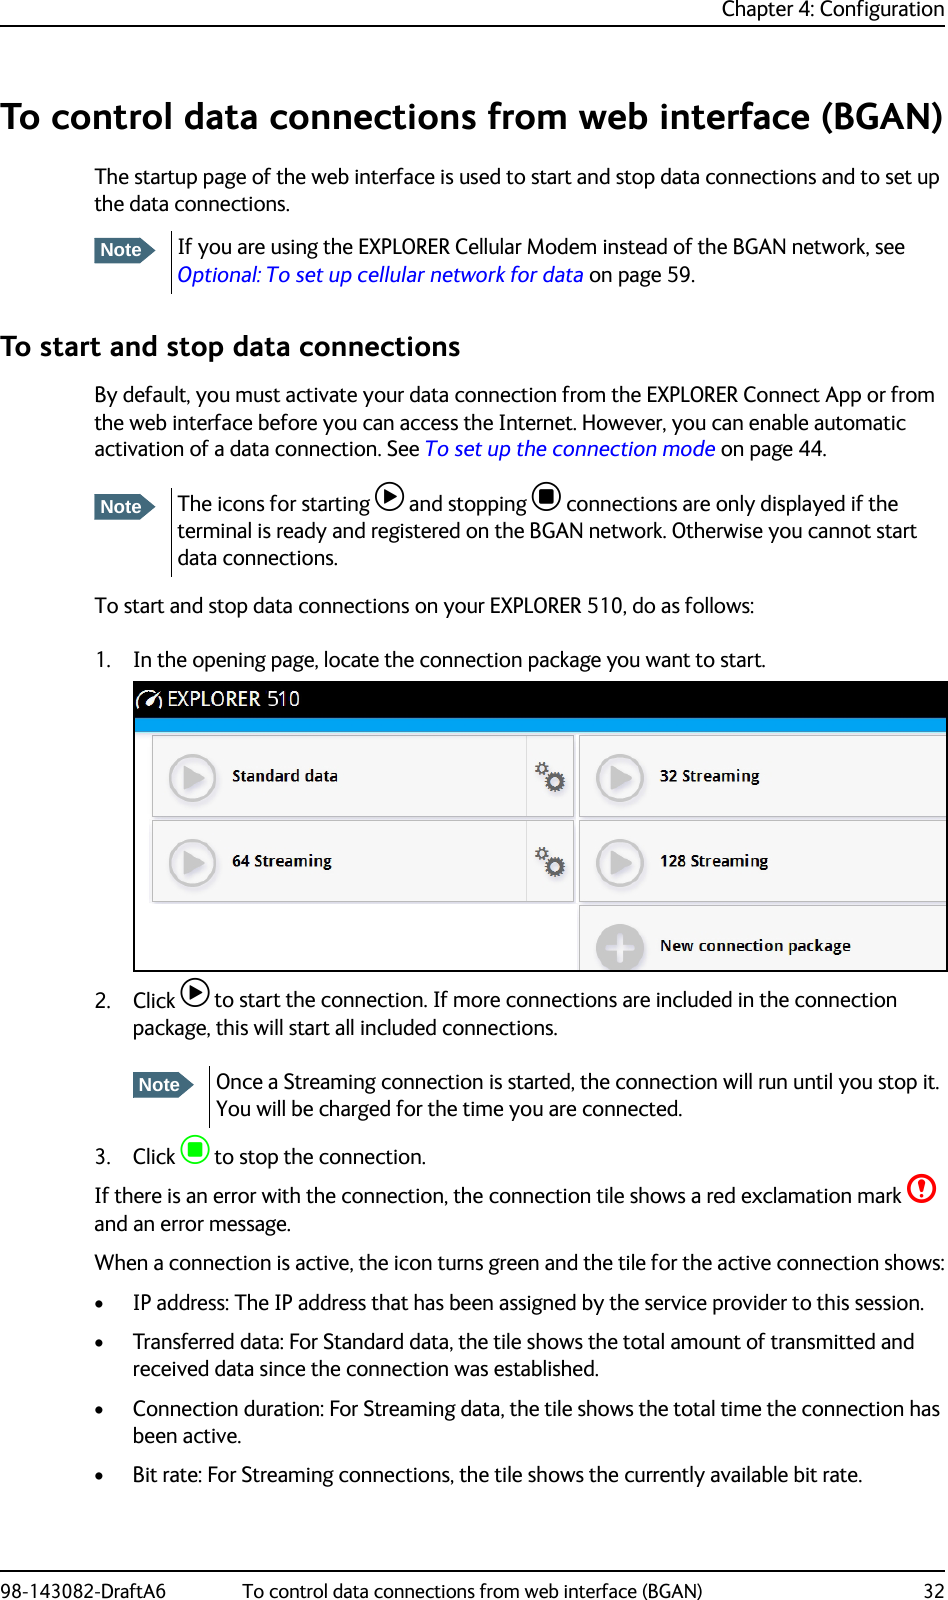 Chapter 4: Configuration98-143082-DraftA6 To control data connections from web interface (BGAN) 32To control data connections from web interface (BGAN)The startup page of the web interface is used to start and stop data connections and to set up the data connections. To start and stop data connectionsBy default, you must activate your data connection from the EXPLORER Connect App or from the web interface before you can access the Internet. However, you can enable automatic activation of a data connection. See To set up the connection mode on page 44. To start and stop data connections on your EXPLORER 510, do as follows:1. In the opening page, locate the connection package you want to start.2. Click  to start the connection. If more connections are included in the connection package, this will start all included connections.3. Click  to stop the connection.If there is an error with the connection, the connection tile shows a red exclamation mark  and an error message.When a connection is active, the icon turns green and the tile for the active connection shows:• IP address: The IP address that has been assigned by the service provider to this session.• Transferred data: For Standard data, the tile shows the total amount of transmitted and received data since the connection was established.• Connection duration: For Streaming data, the tile shows the total time the connection has been active.• Bit rate: For Streaming connections, the tile shows the currently available bit rate.NoteIf you are using the EXPLORER Cellular Modem instead of the BGAN network, see Optional: To set up cellular network for data on page 59.NoteThe icons for starting  and stopping  connections are only displayed if the terminal is ready and registered on the BGAN network. Otherwise you cannot start data connections.NoteOnce a Streaming connection is started, the connection will run until you stop it. You will be charged for the time you are connected.